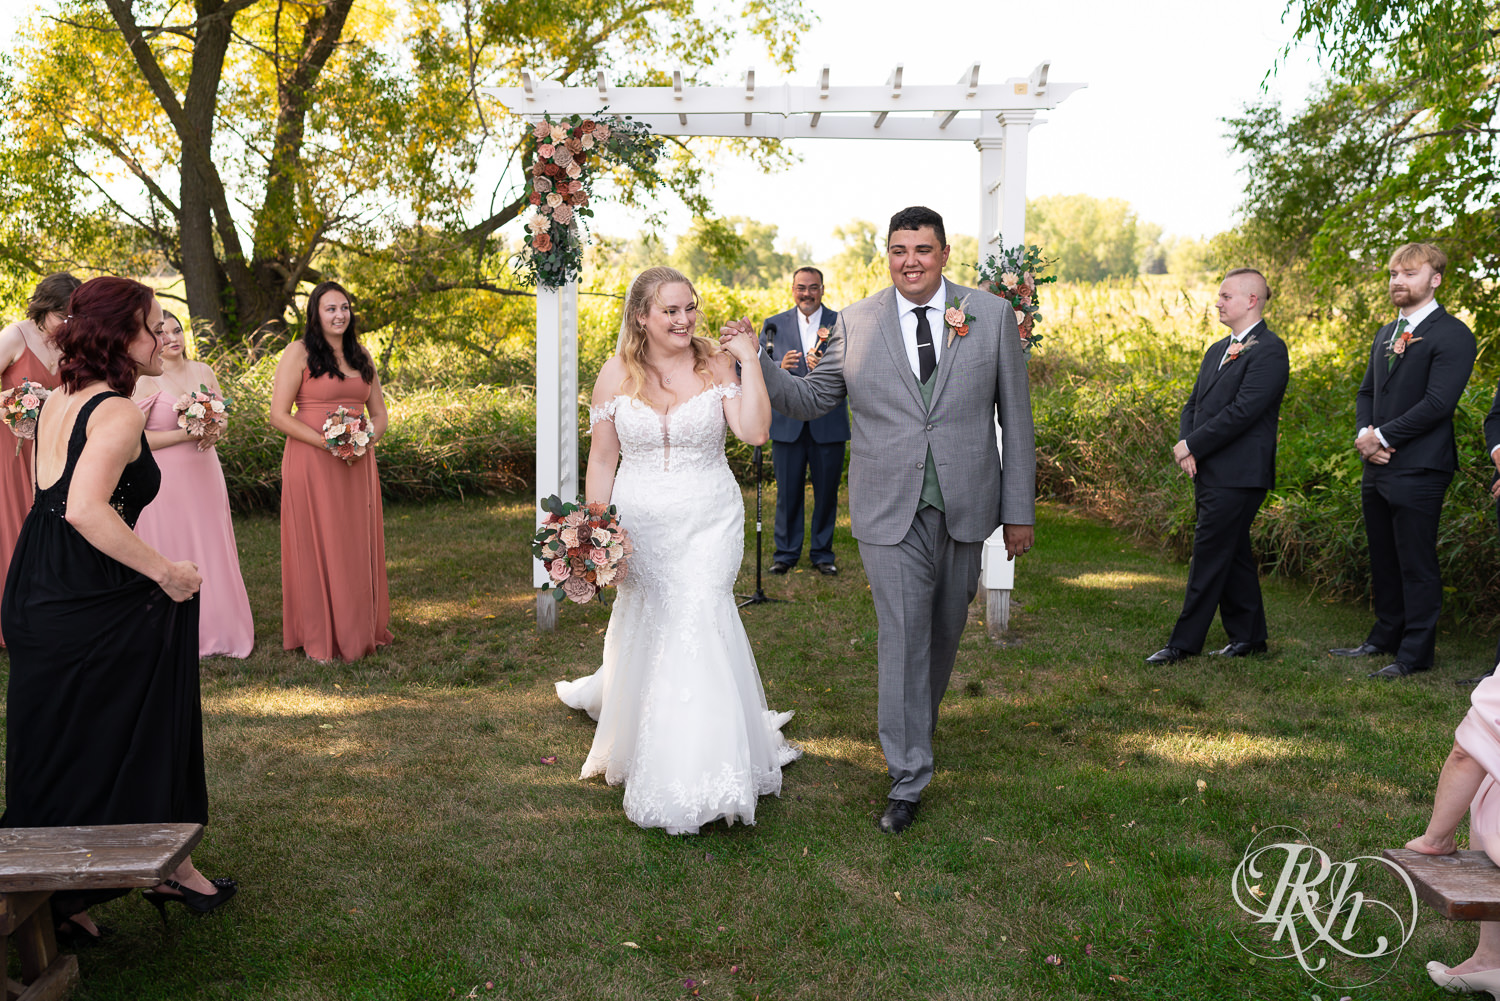 Bride and groom laugh during summer wedding ceremony at Cottage Farmhouse in Glencoe, Minnesota.